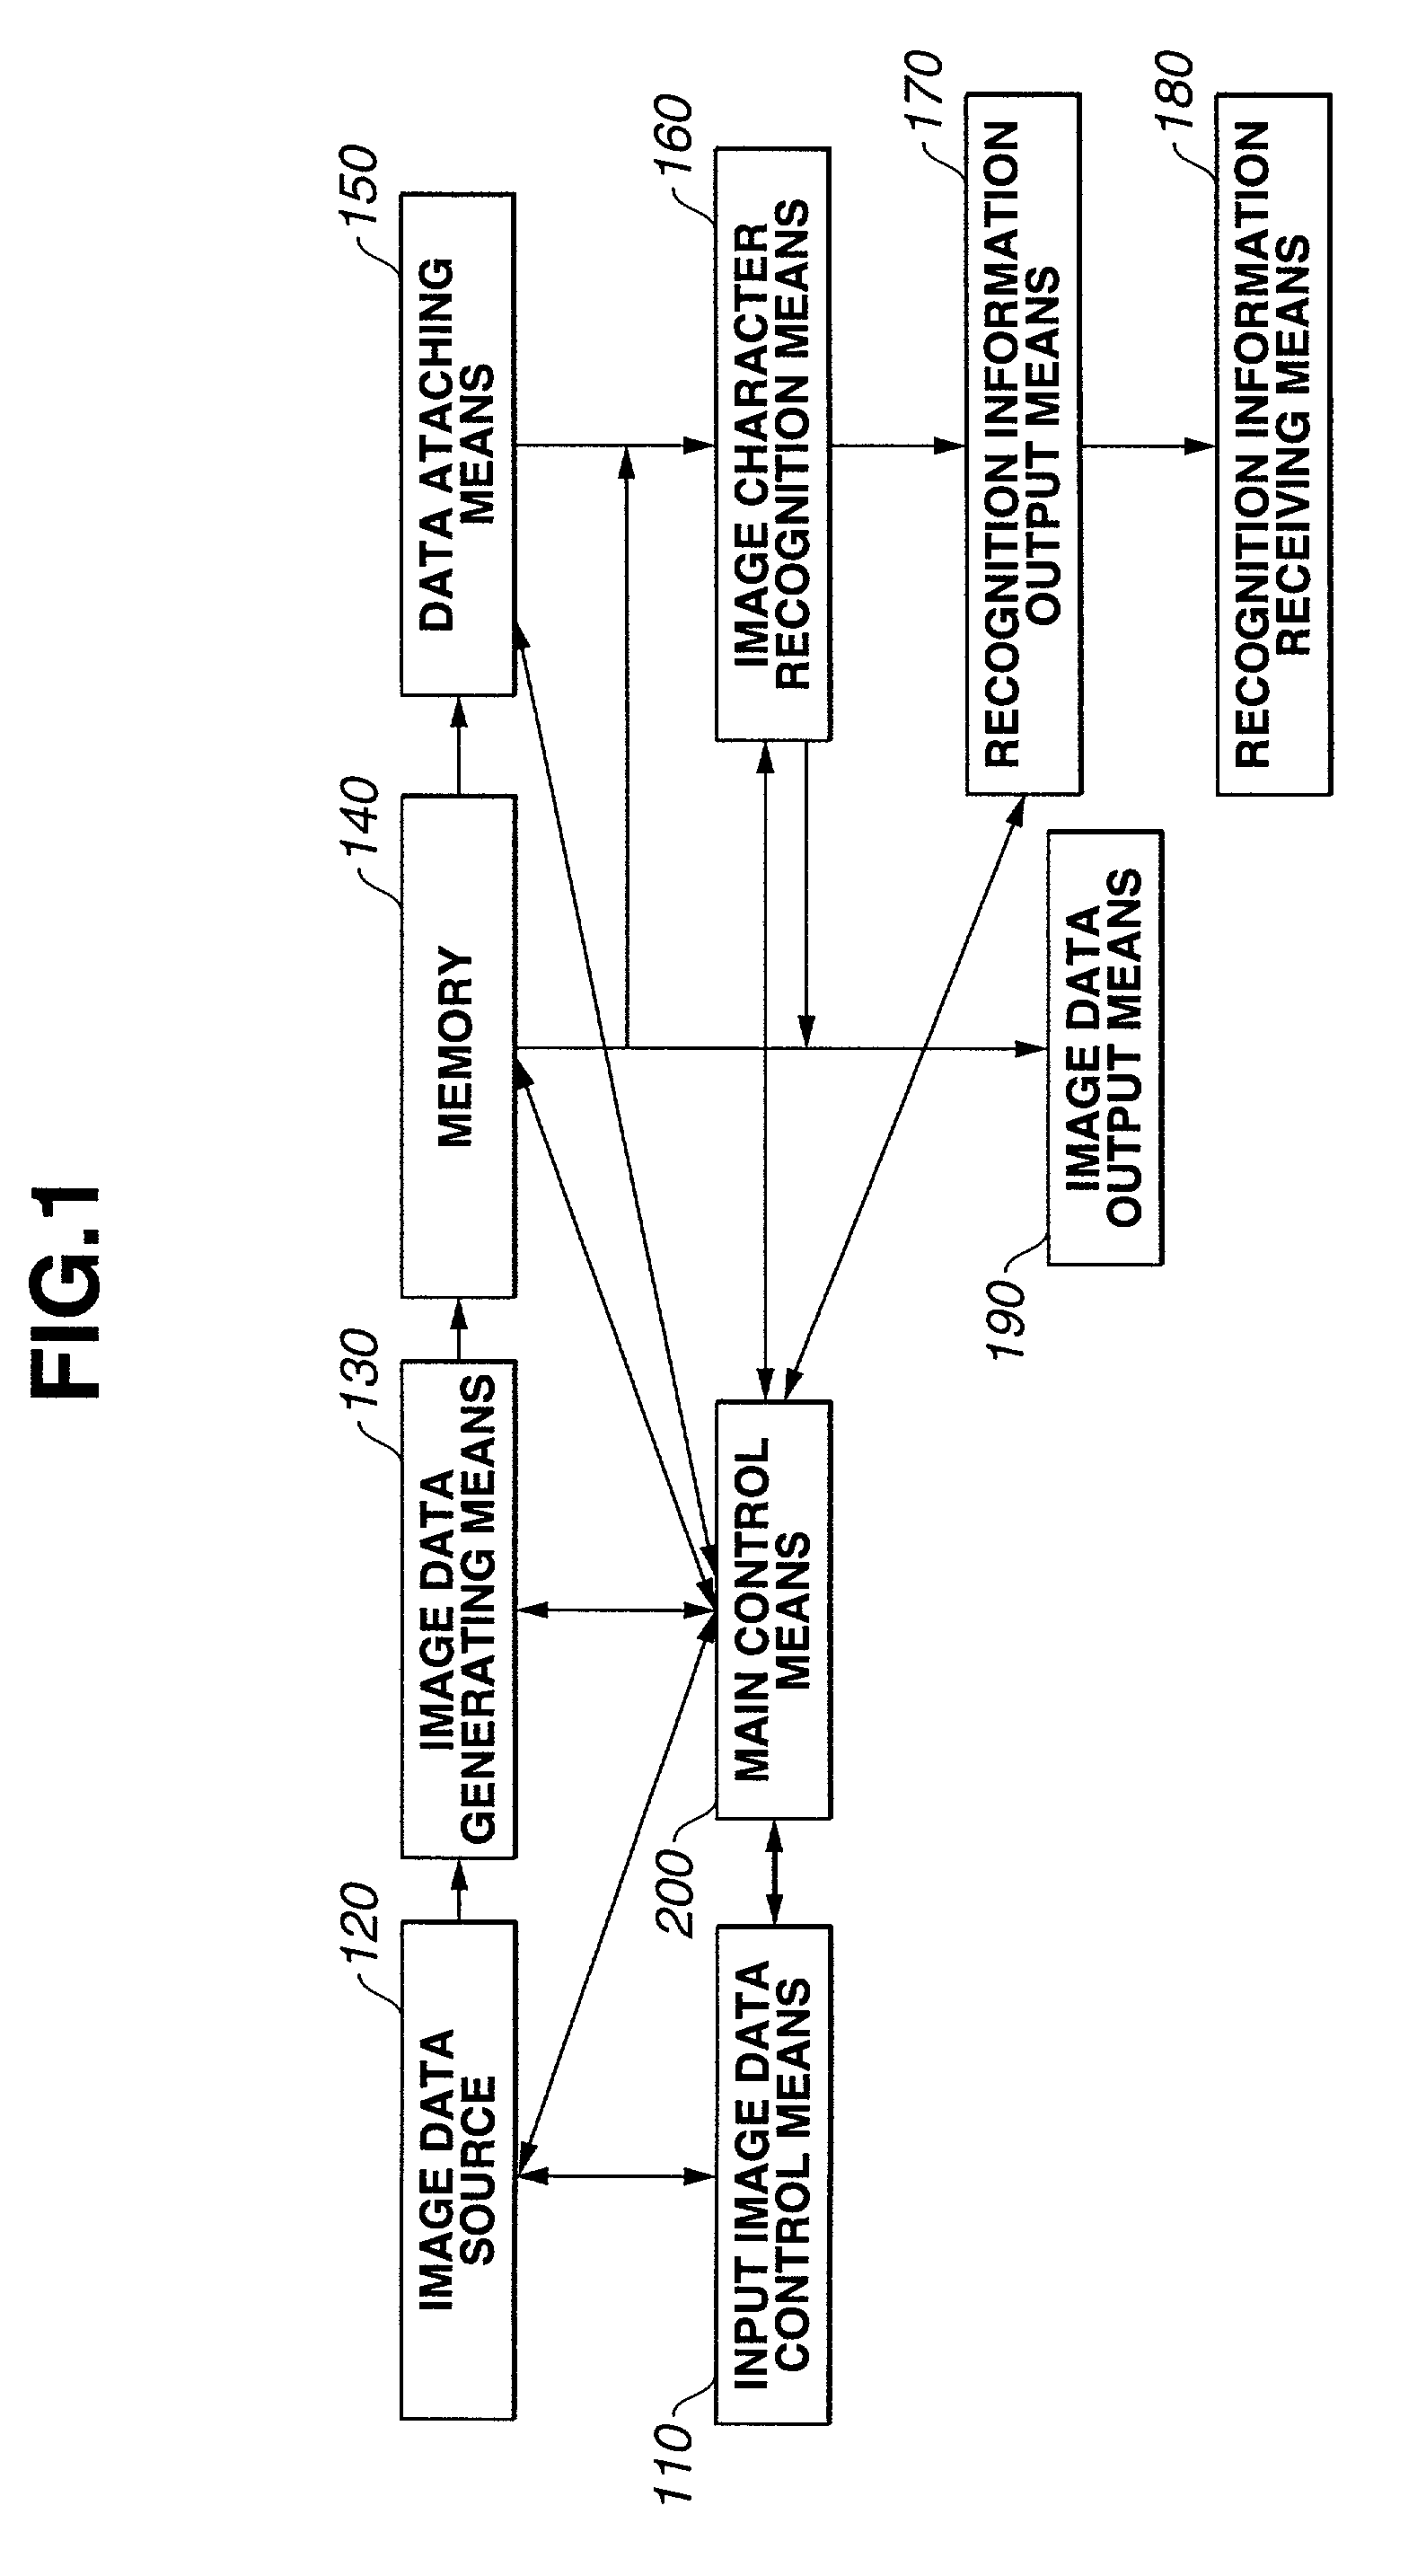 Image processing apparatus, image processing method and a computer program product for judging whether image data include specific information related to copy protection